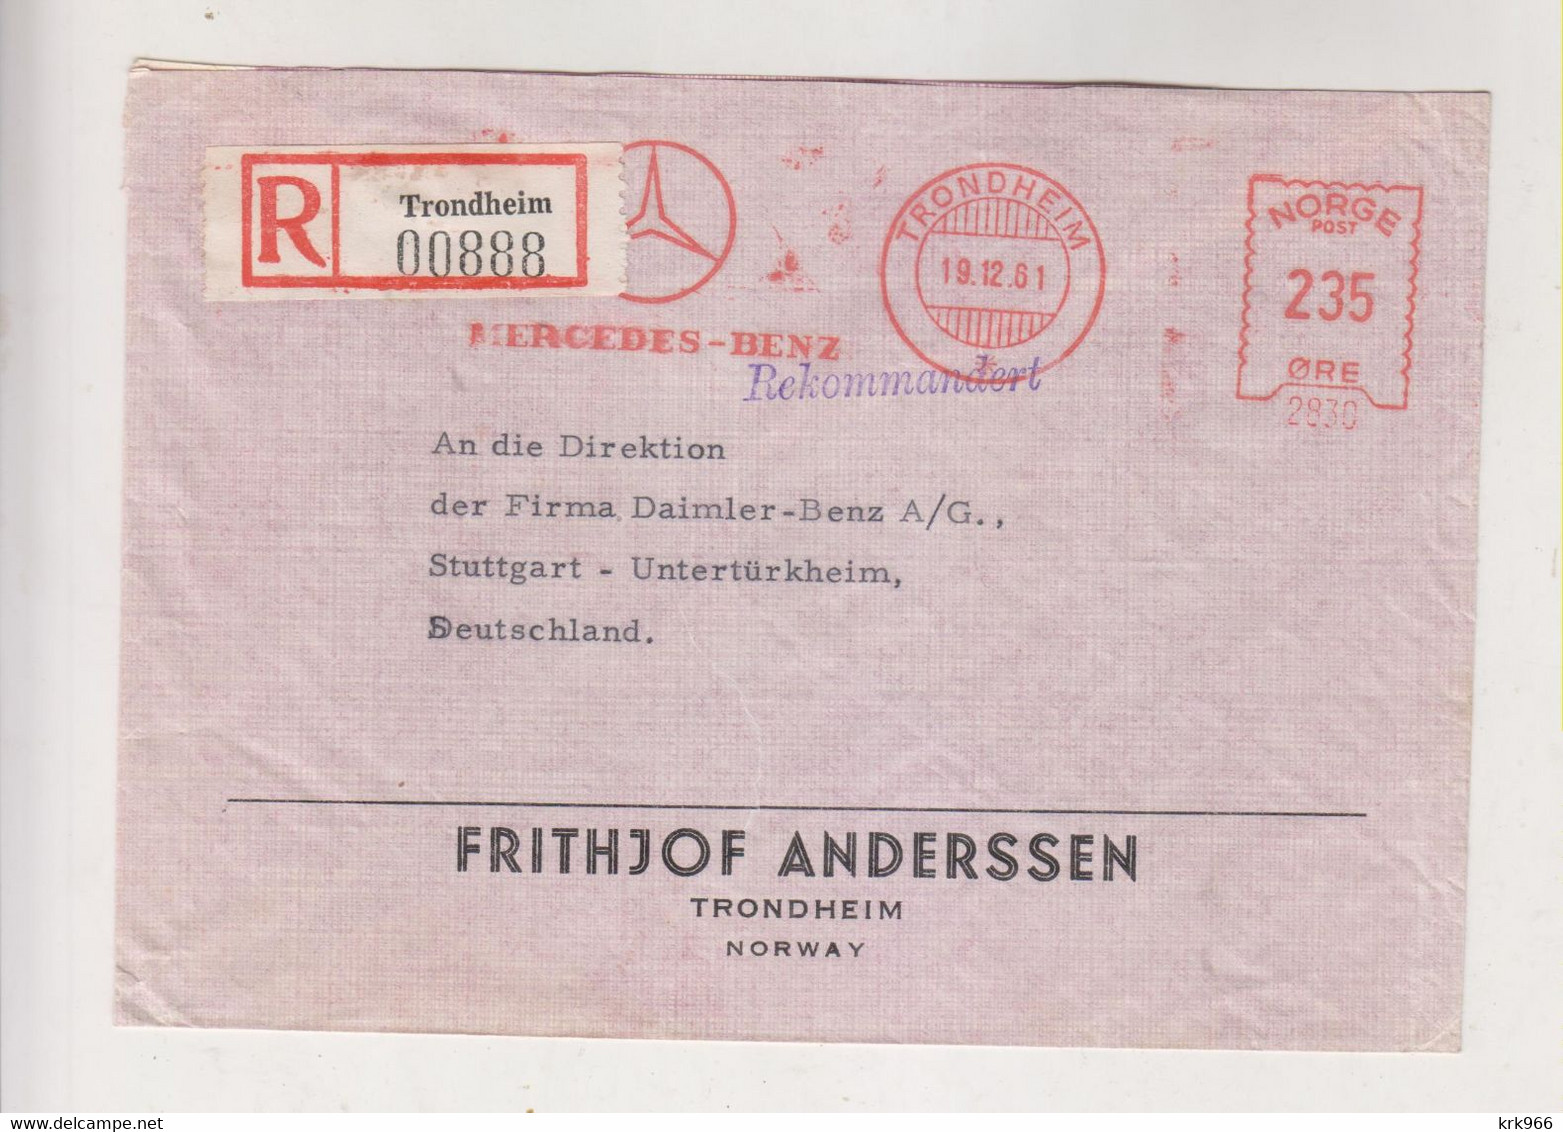 NORWAY TRONDHEIM   1961 Nice Registered   Cover To Germany Meter Stamp - Covers & Documents